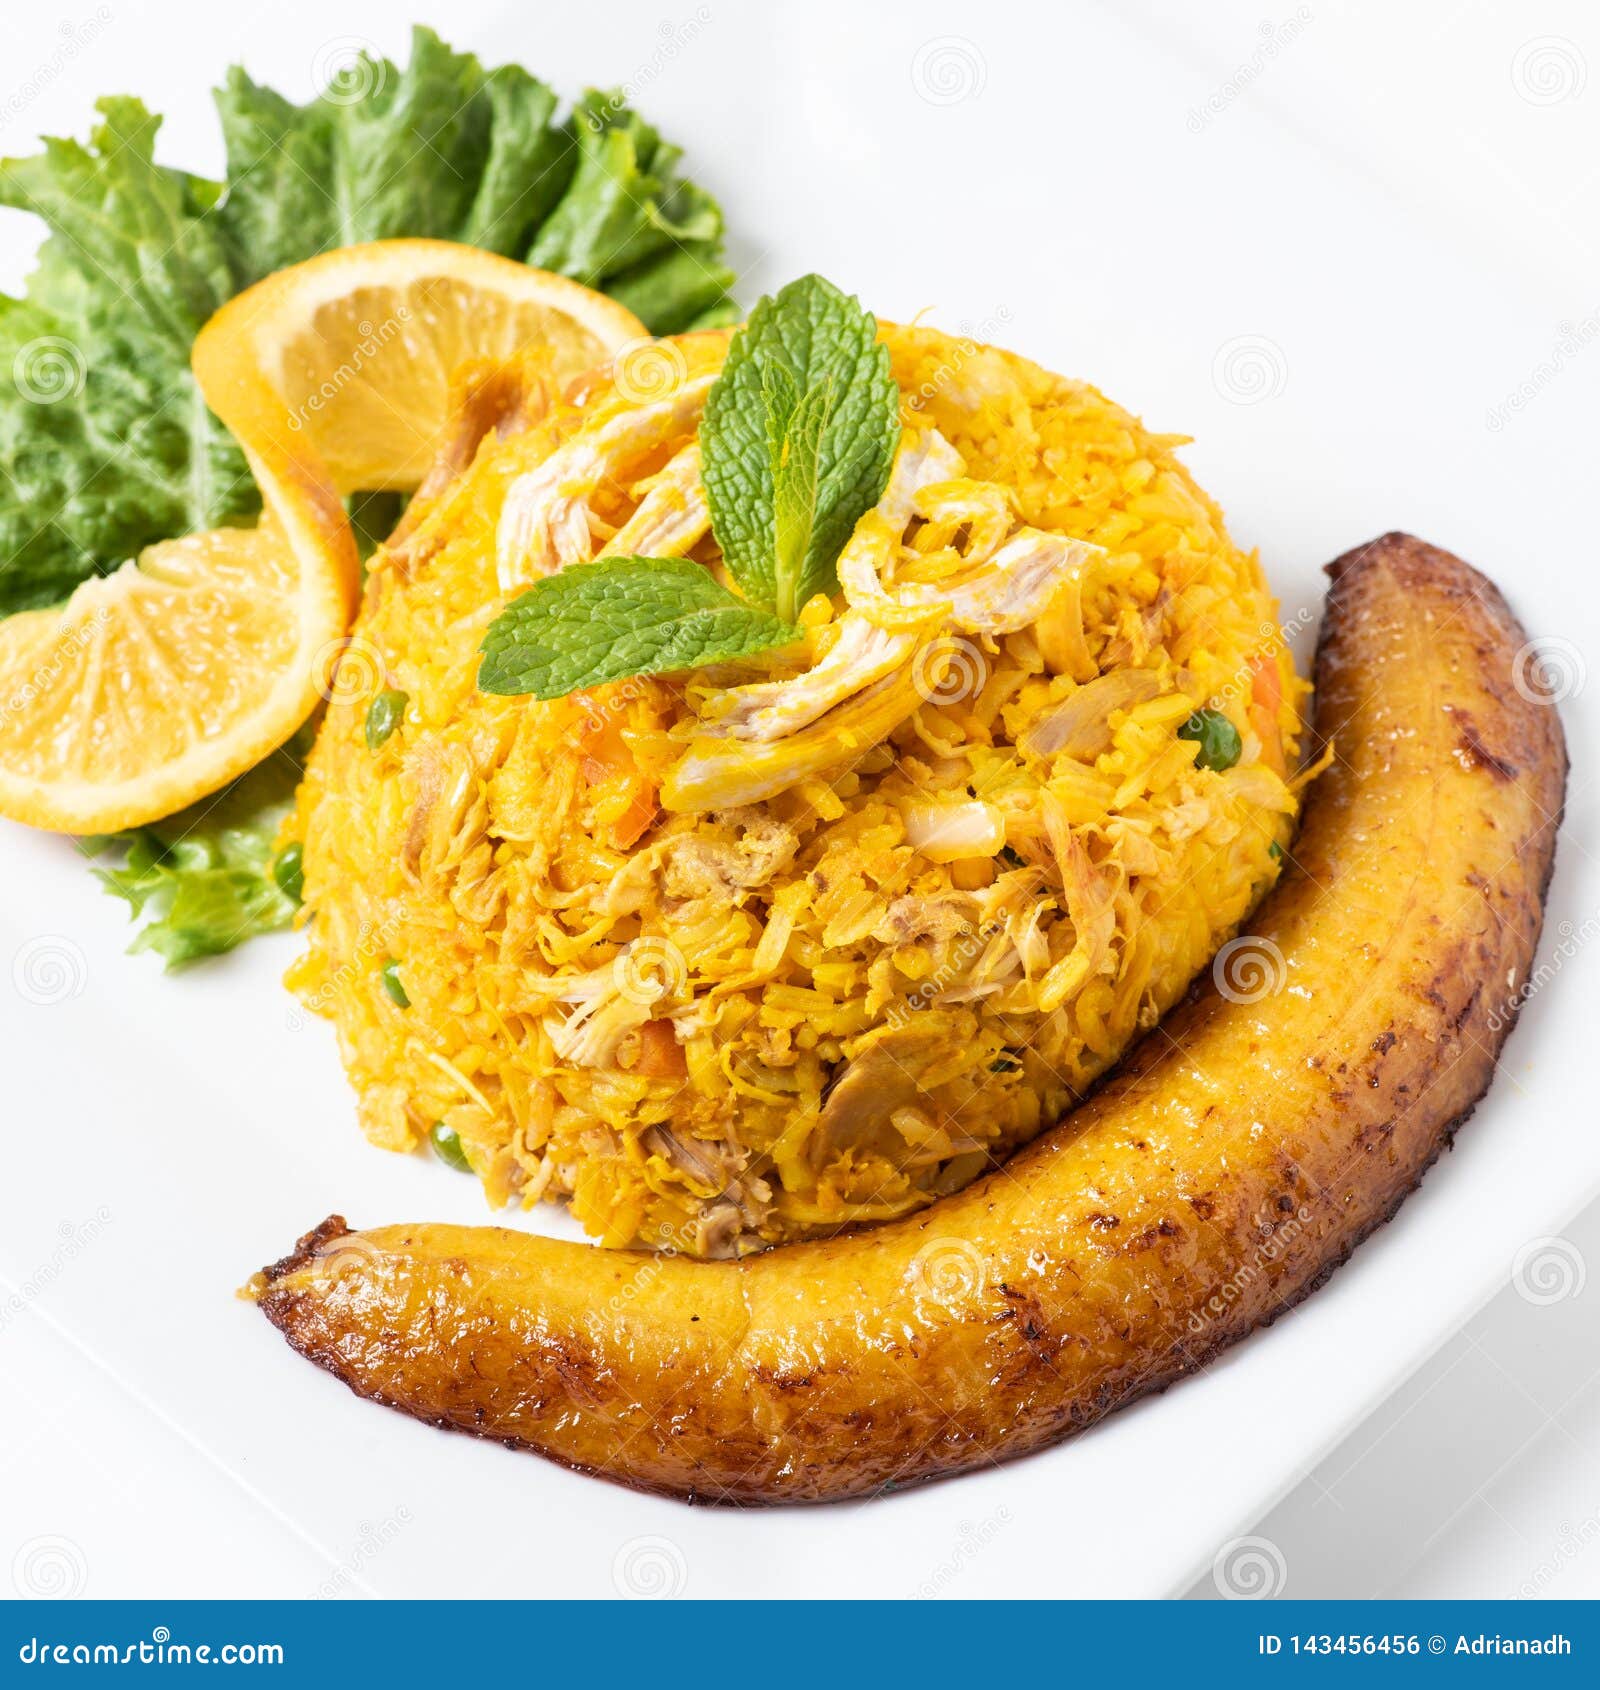 arroz con pollo colombiano colombian style rice with chicken meat on white background